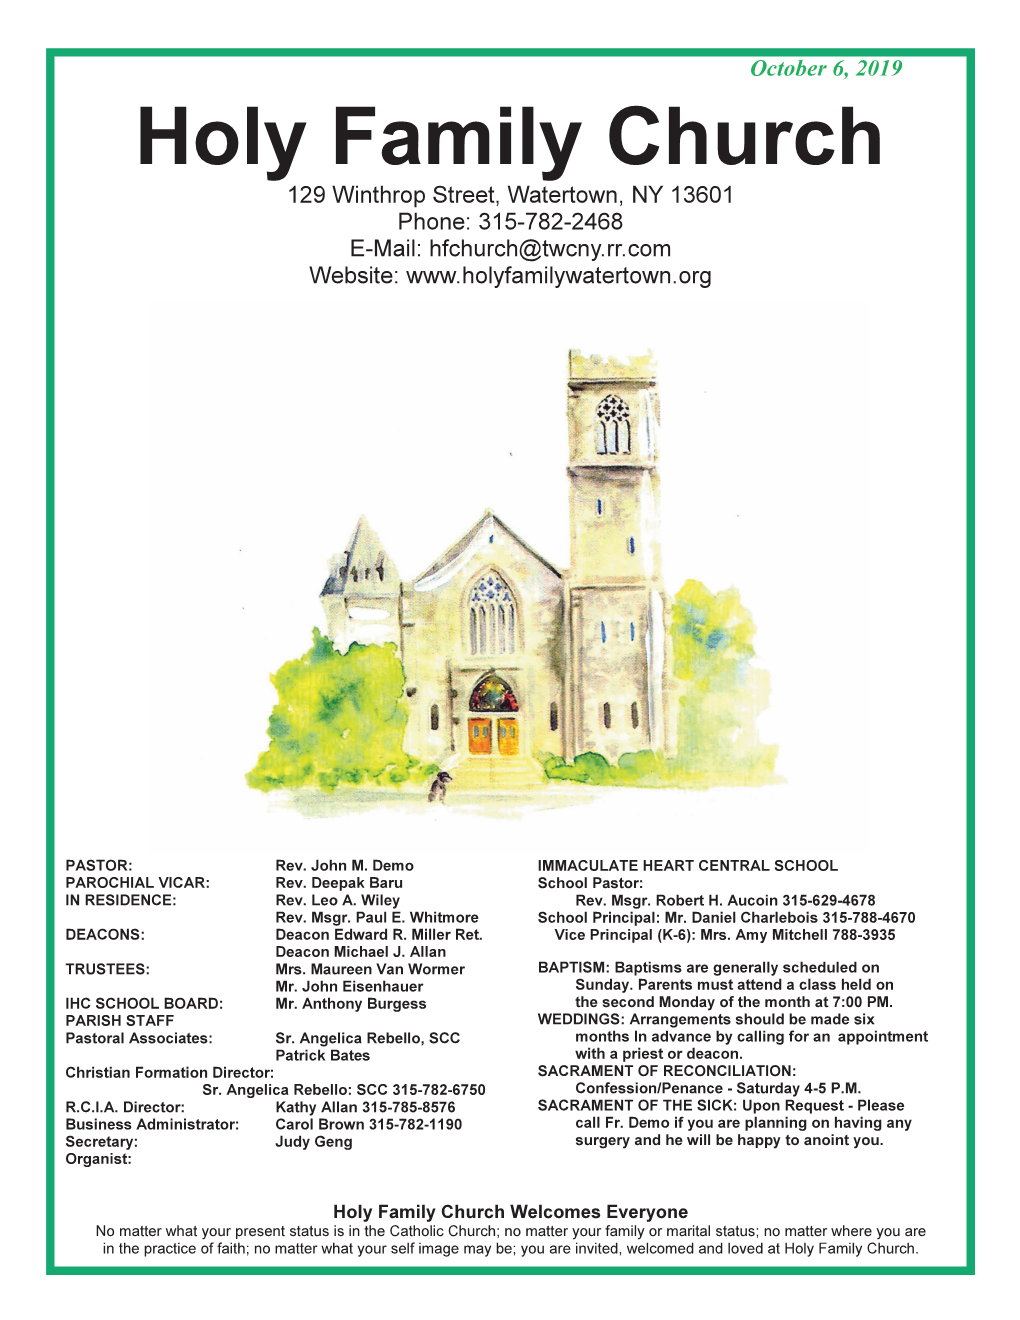 Holy Family Church 129 Winthrop Street, Watertown, NY 13601 Phone: 315-782-2468 E-Mail: Hfchurch@Twcny.Rr.Com Website